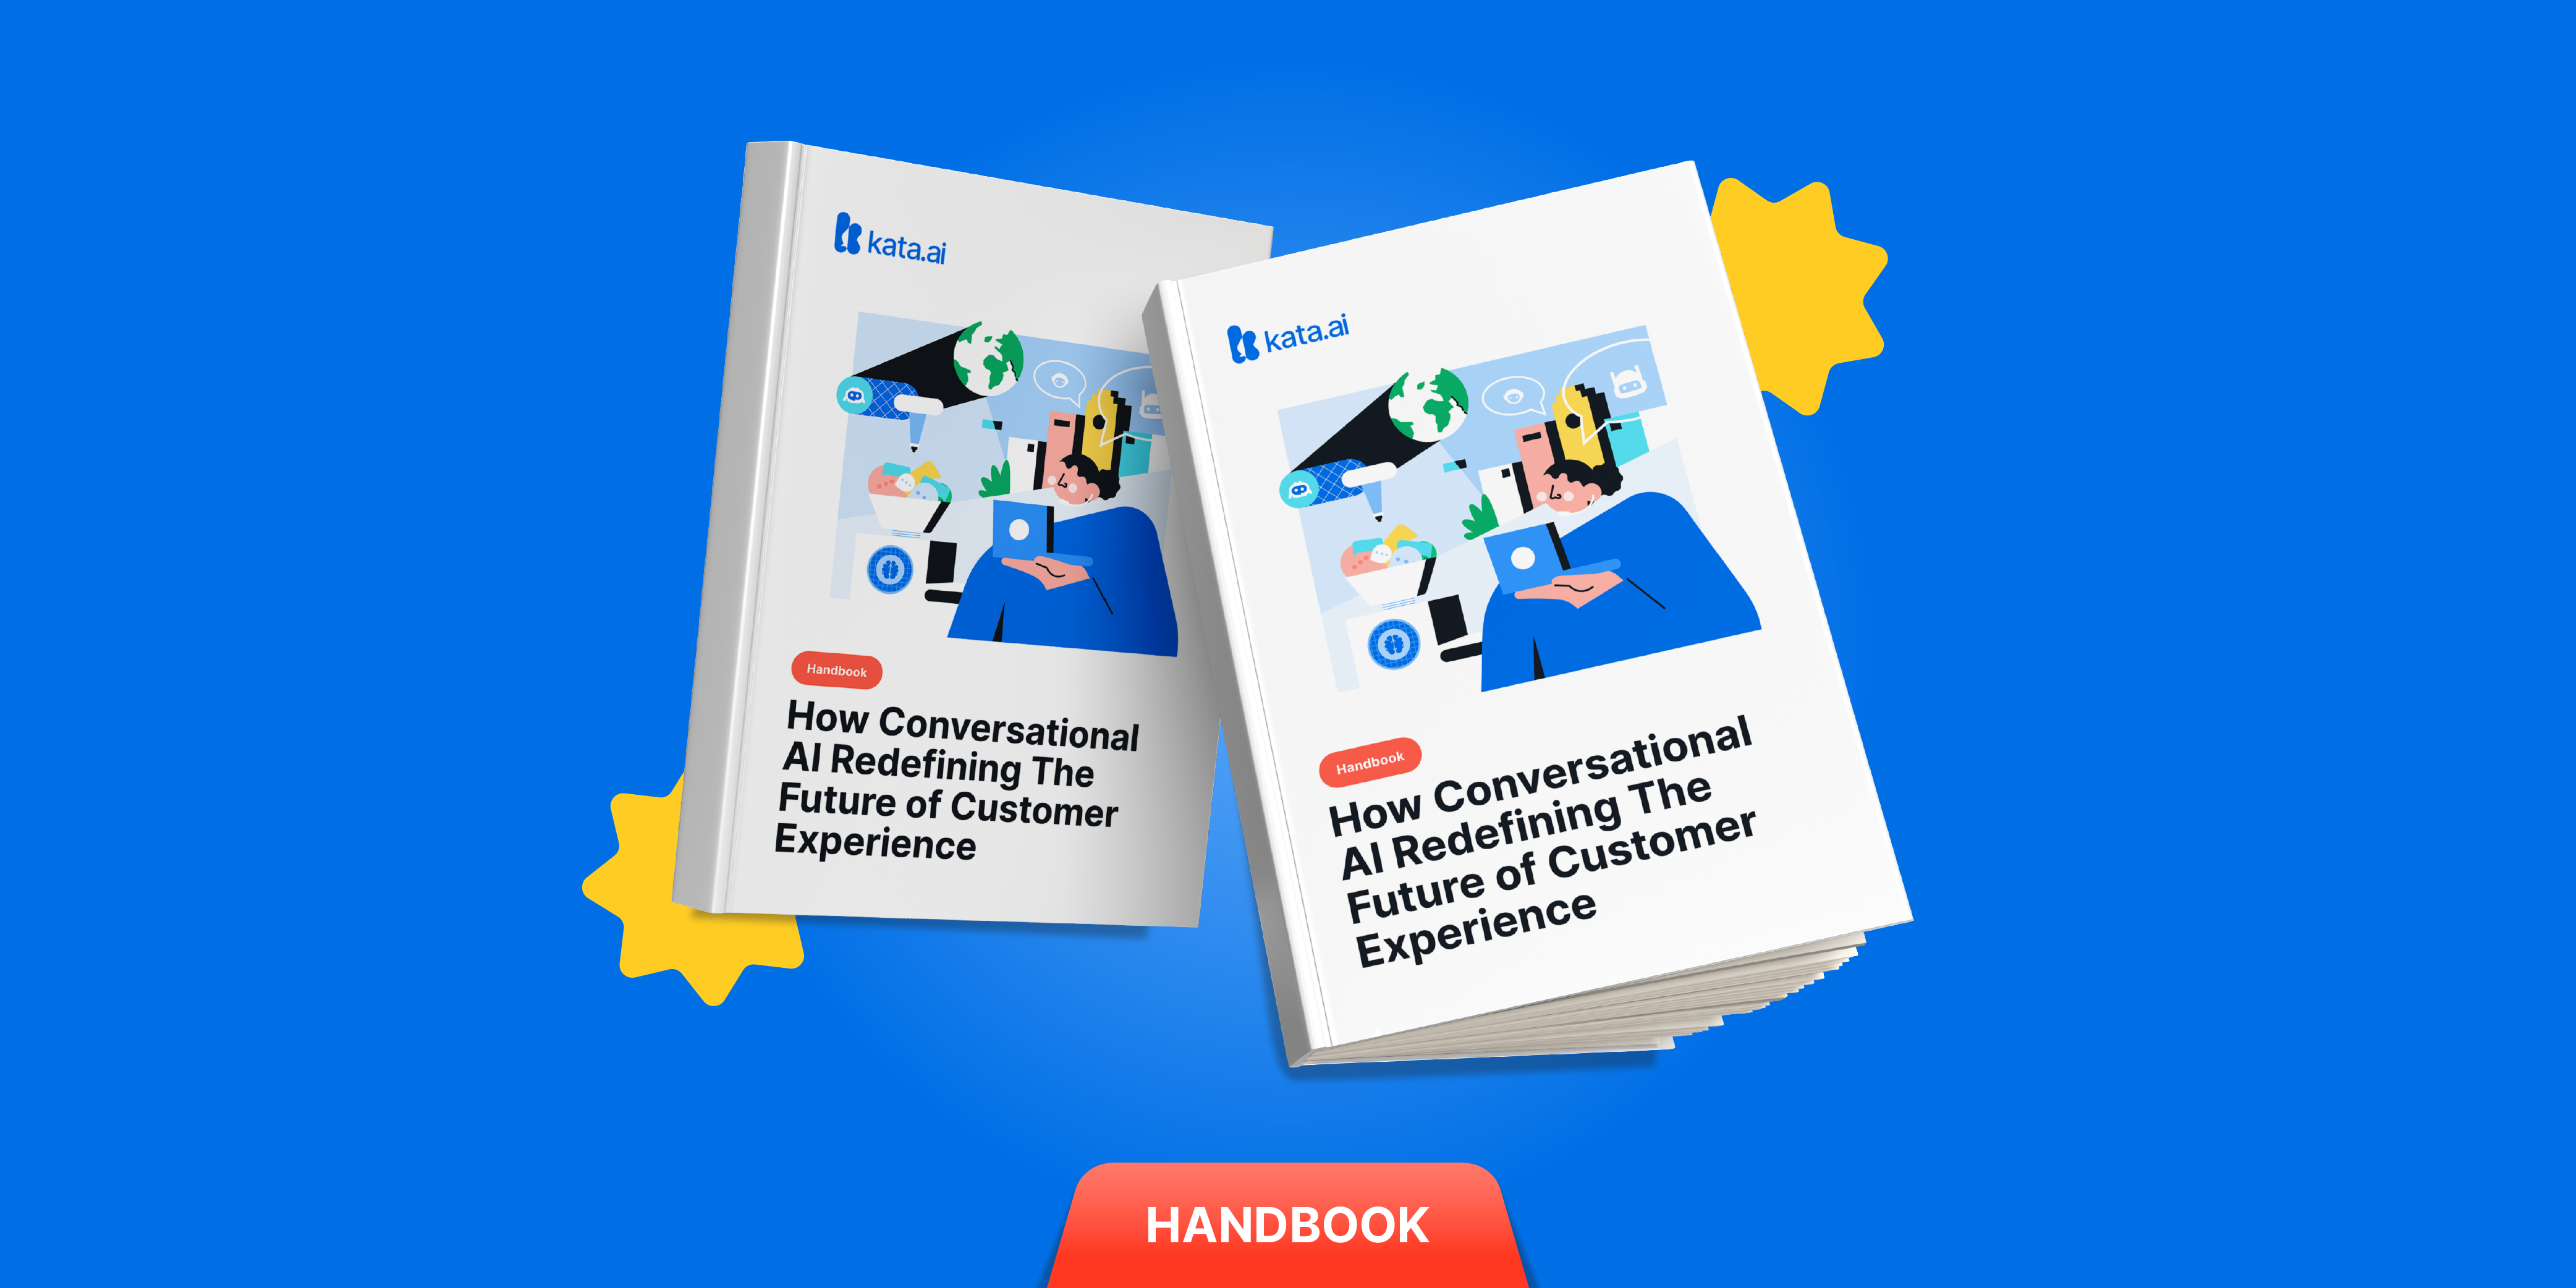 Handbook - How Conversational AI Redefining The Future of Customer Experience